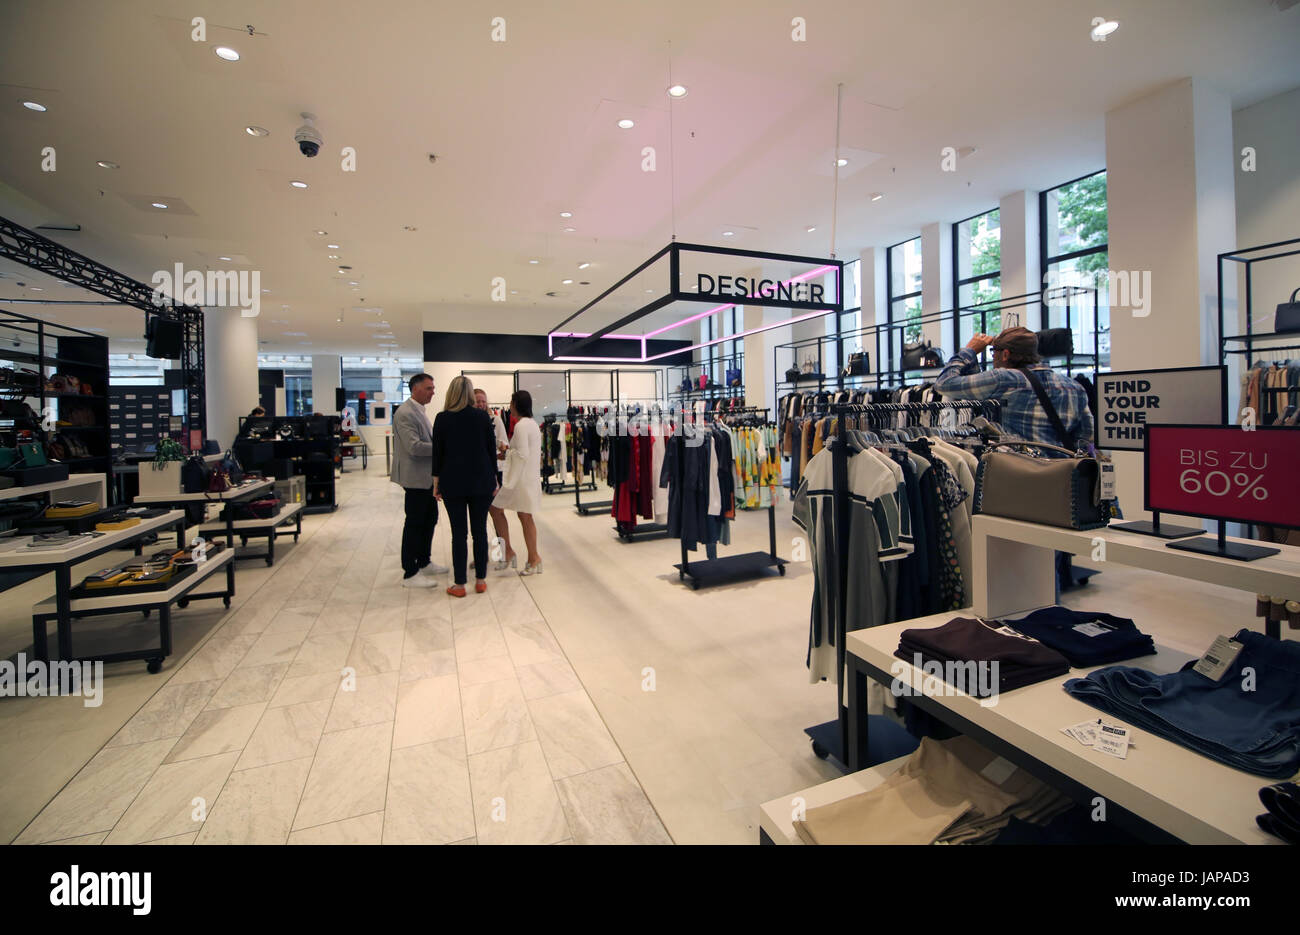 Saks Off 5th to open first Dutch store in Rotterdam on 7 September